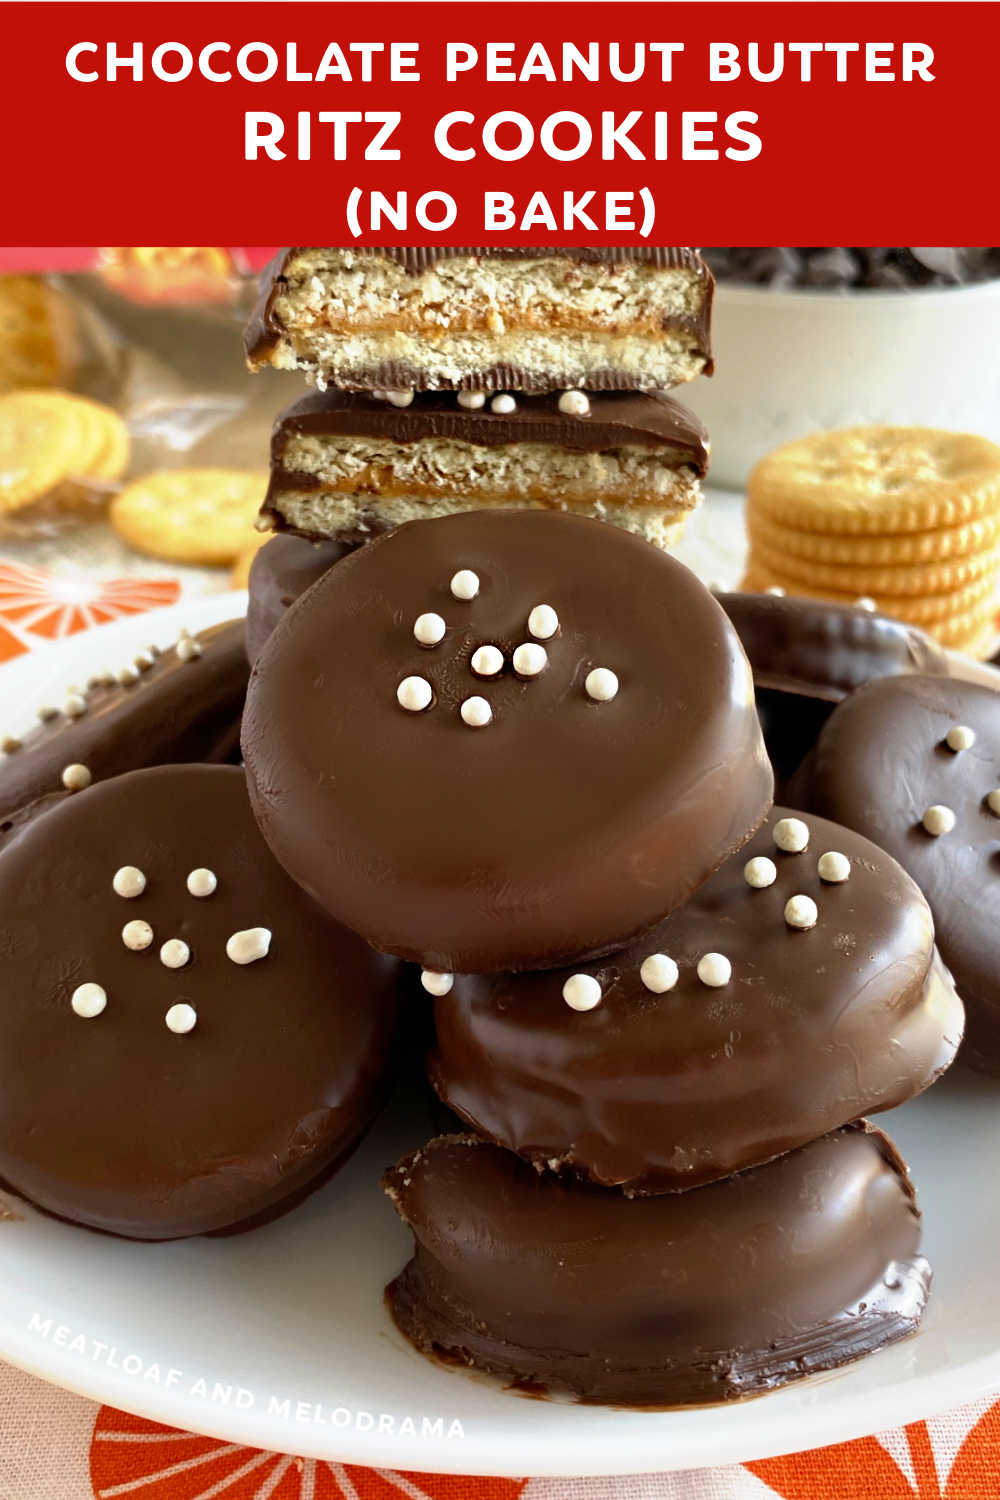 
Chocolate Peanut Butter Ritz Cookies made with buttery crackers, melted chocolate and creamy peanut butter are an easy no bake dessert for summer or yummy treats perfect for the holidays. You'll love this delicious sandwich cookie recipe! via @meamel